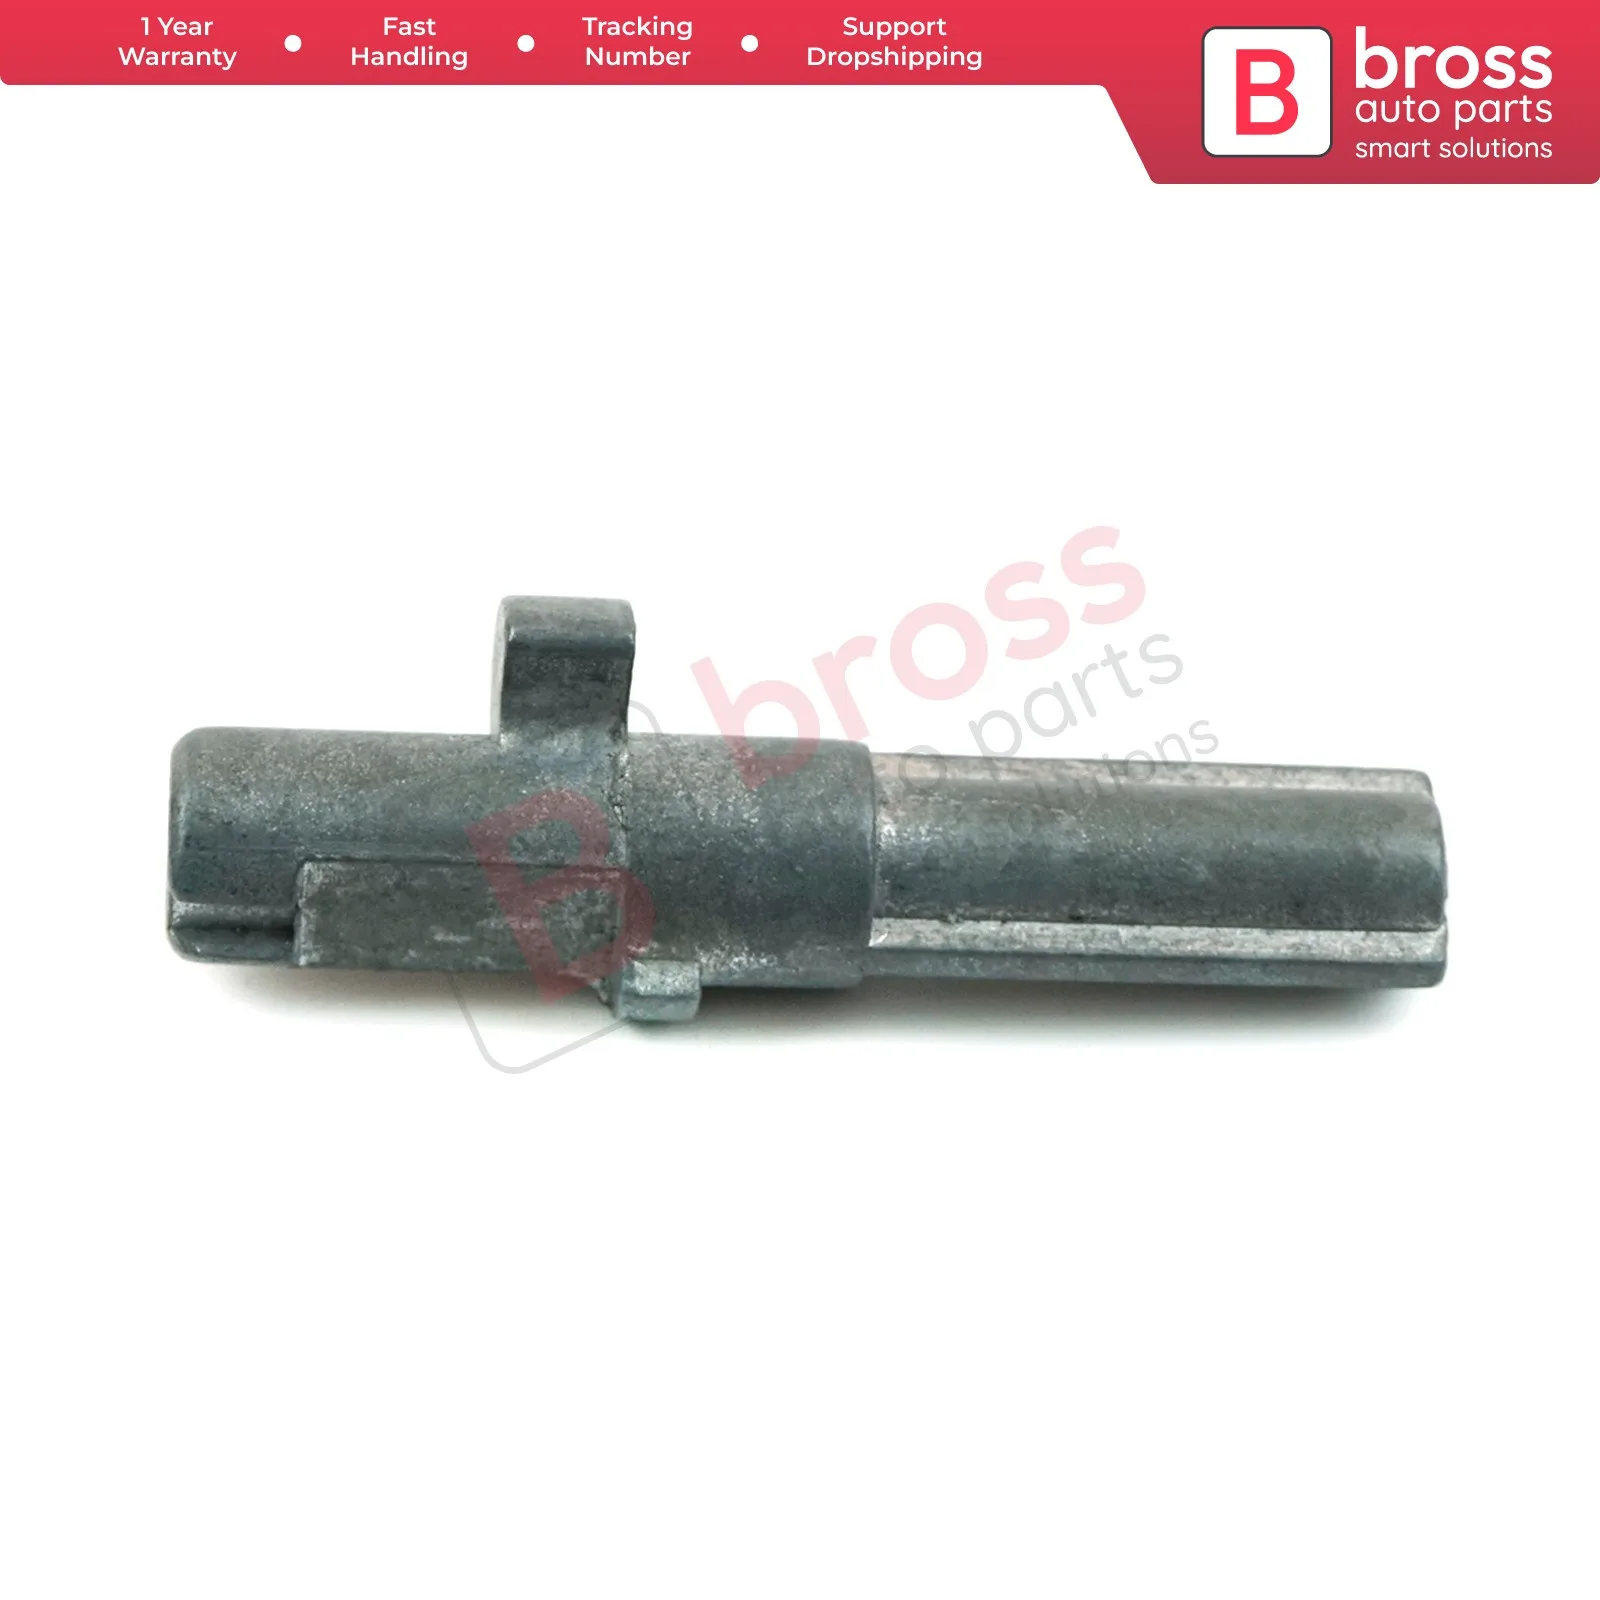 

Bross Auto Parts BSP16 Ignition Lock Cylinder Tab Long For Mercedes E CLASS W210 Fast Shipment Free Shipment Ship From turkey